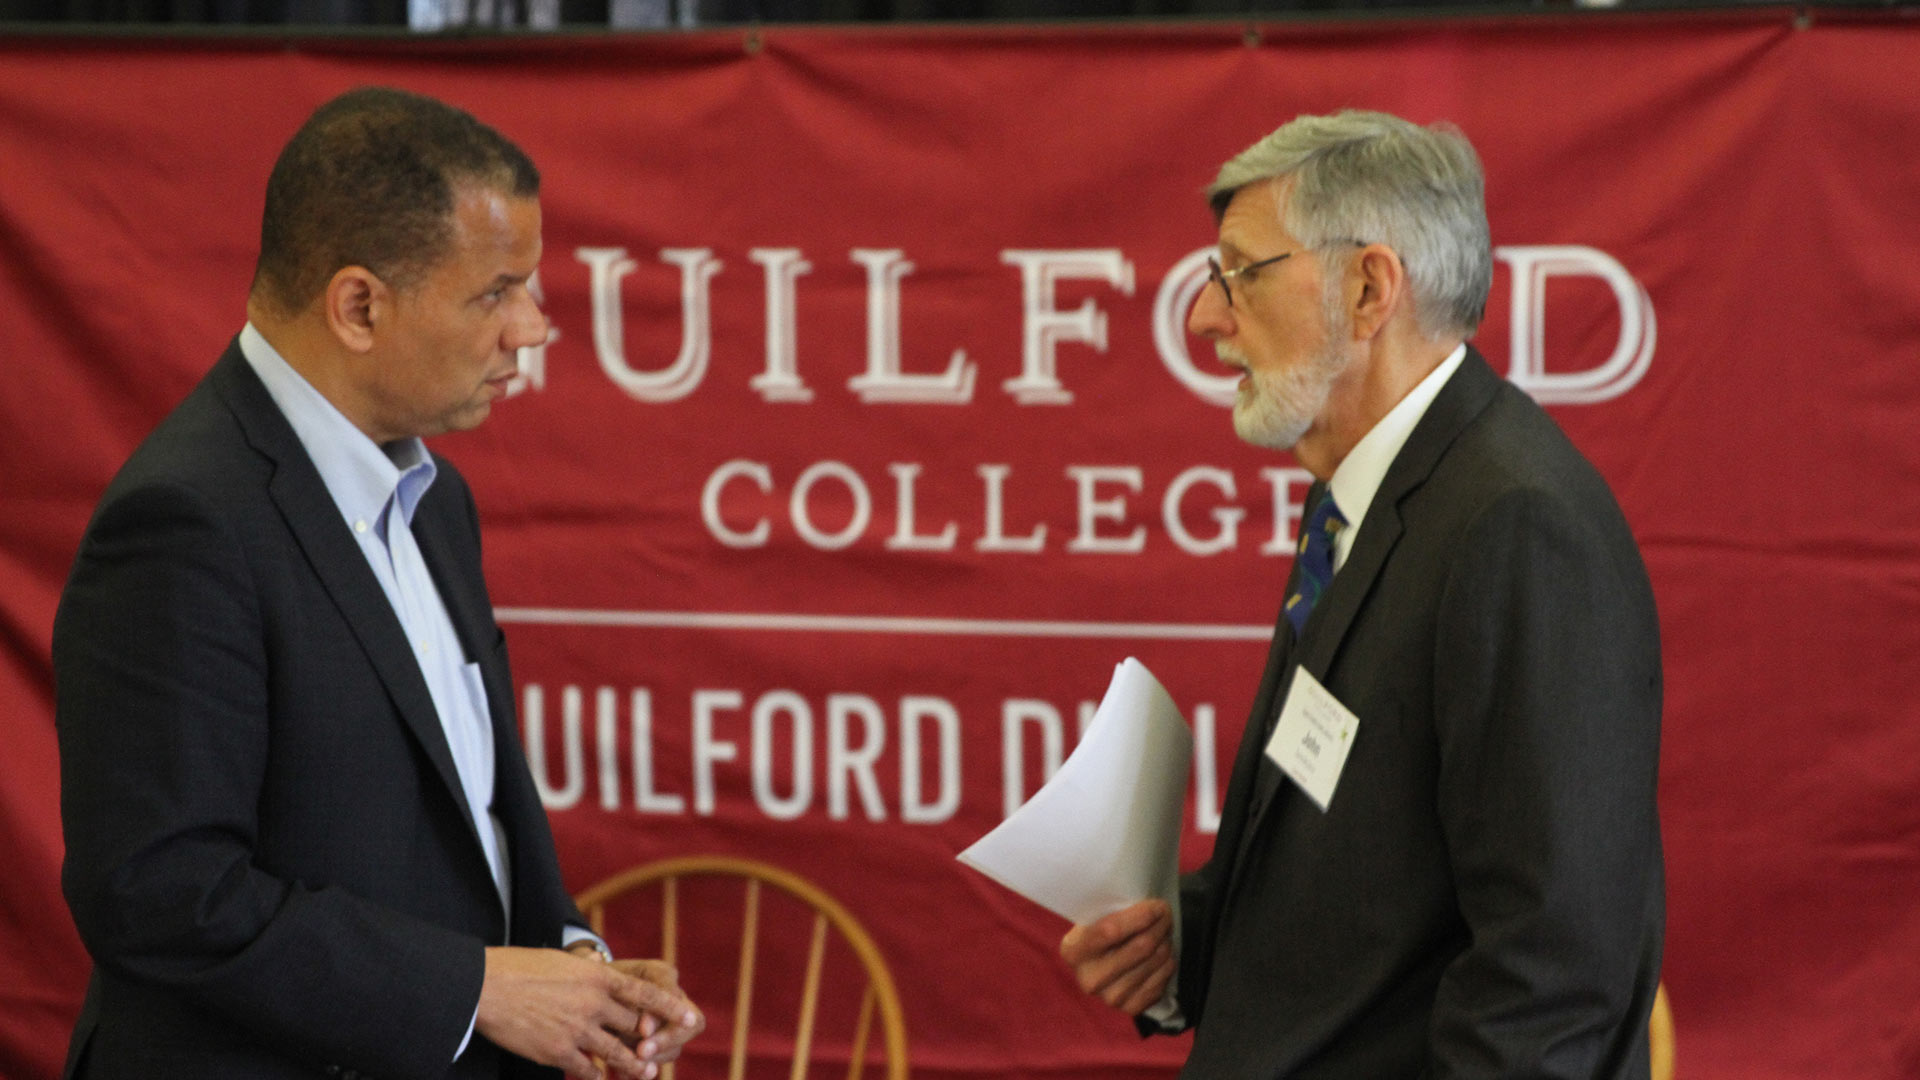 Kyle Farmbry, Guilford College President, and John Jenkins of Cone Health